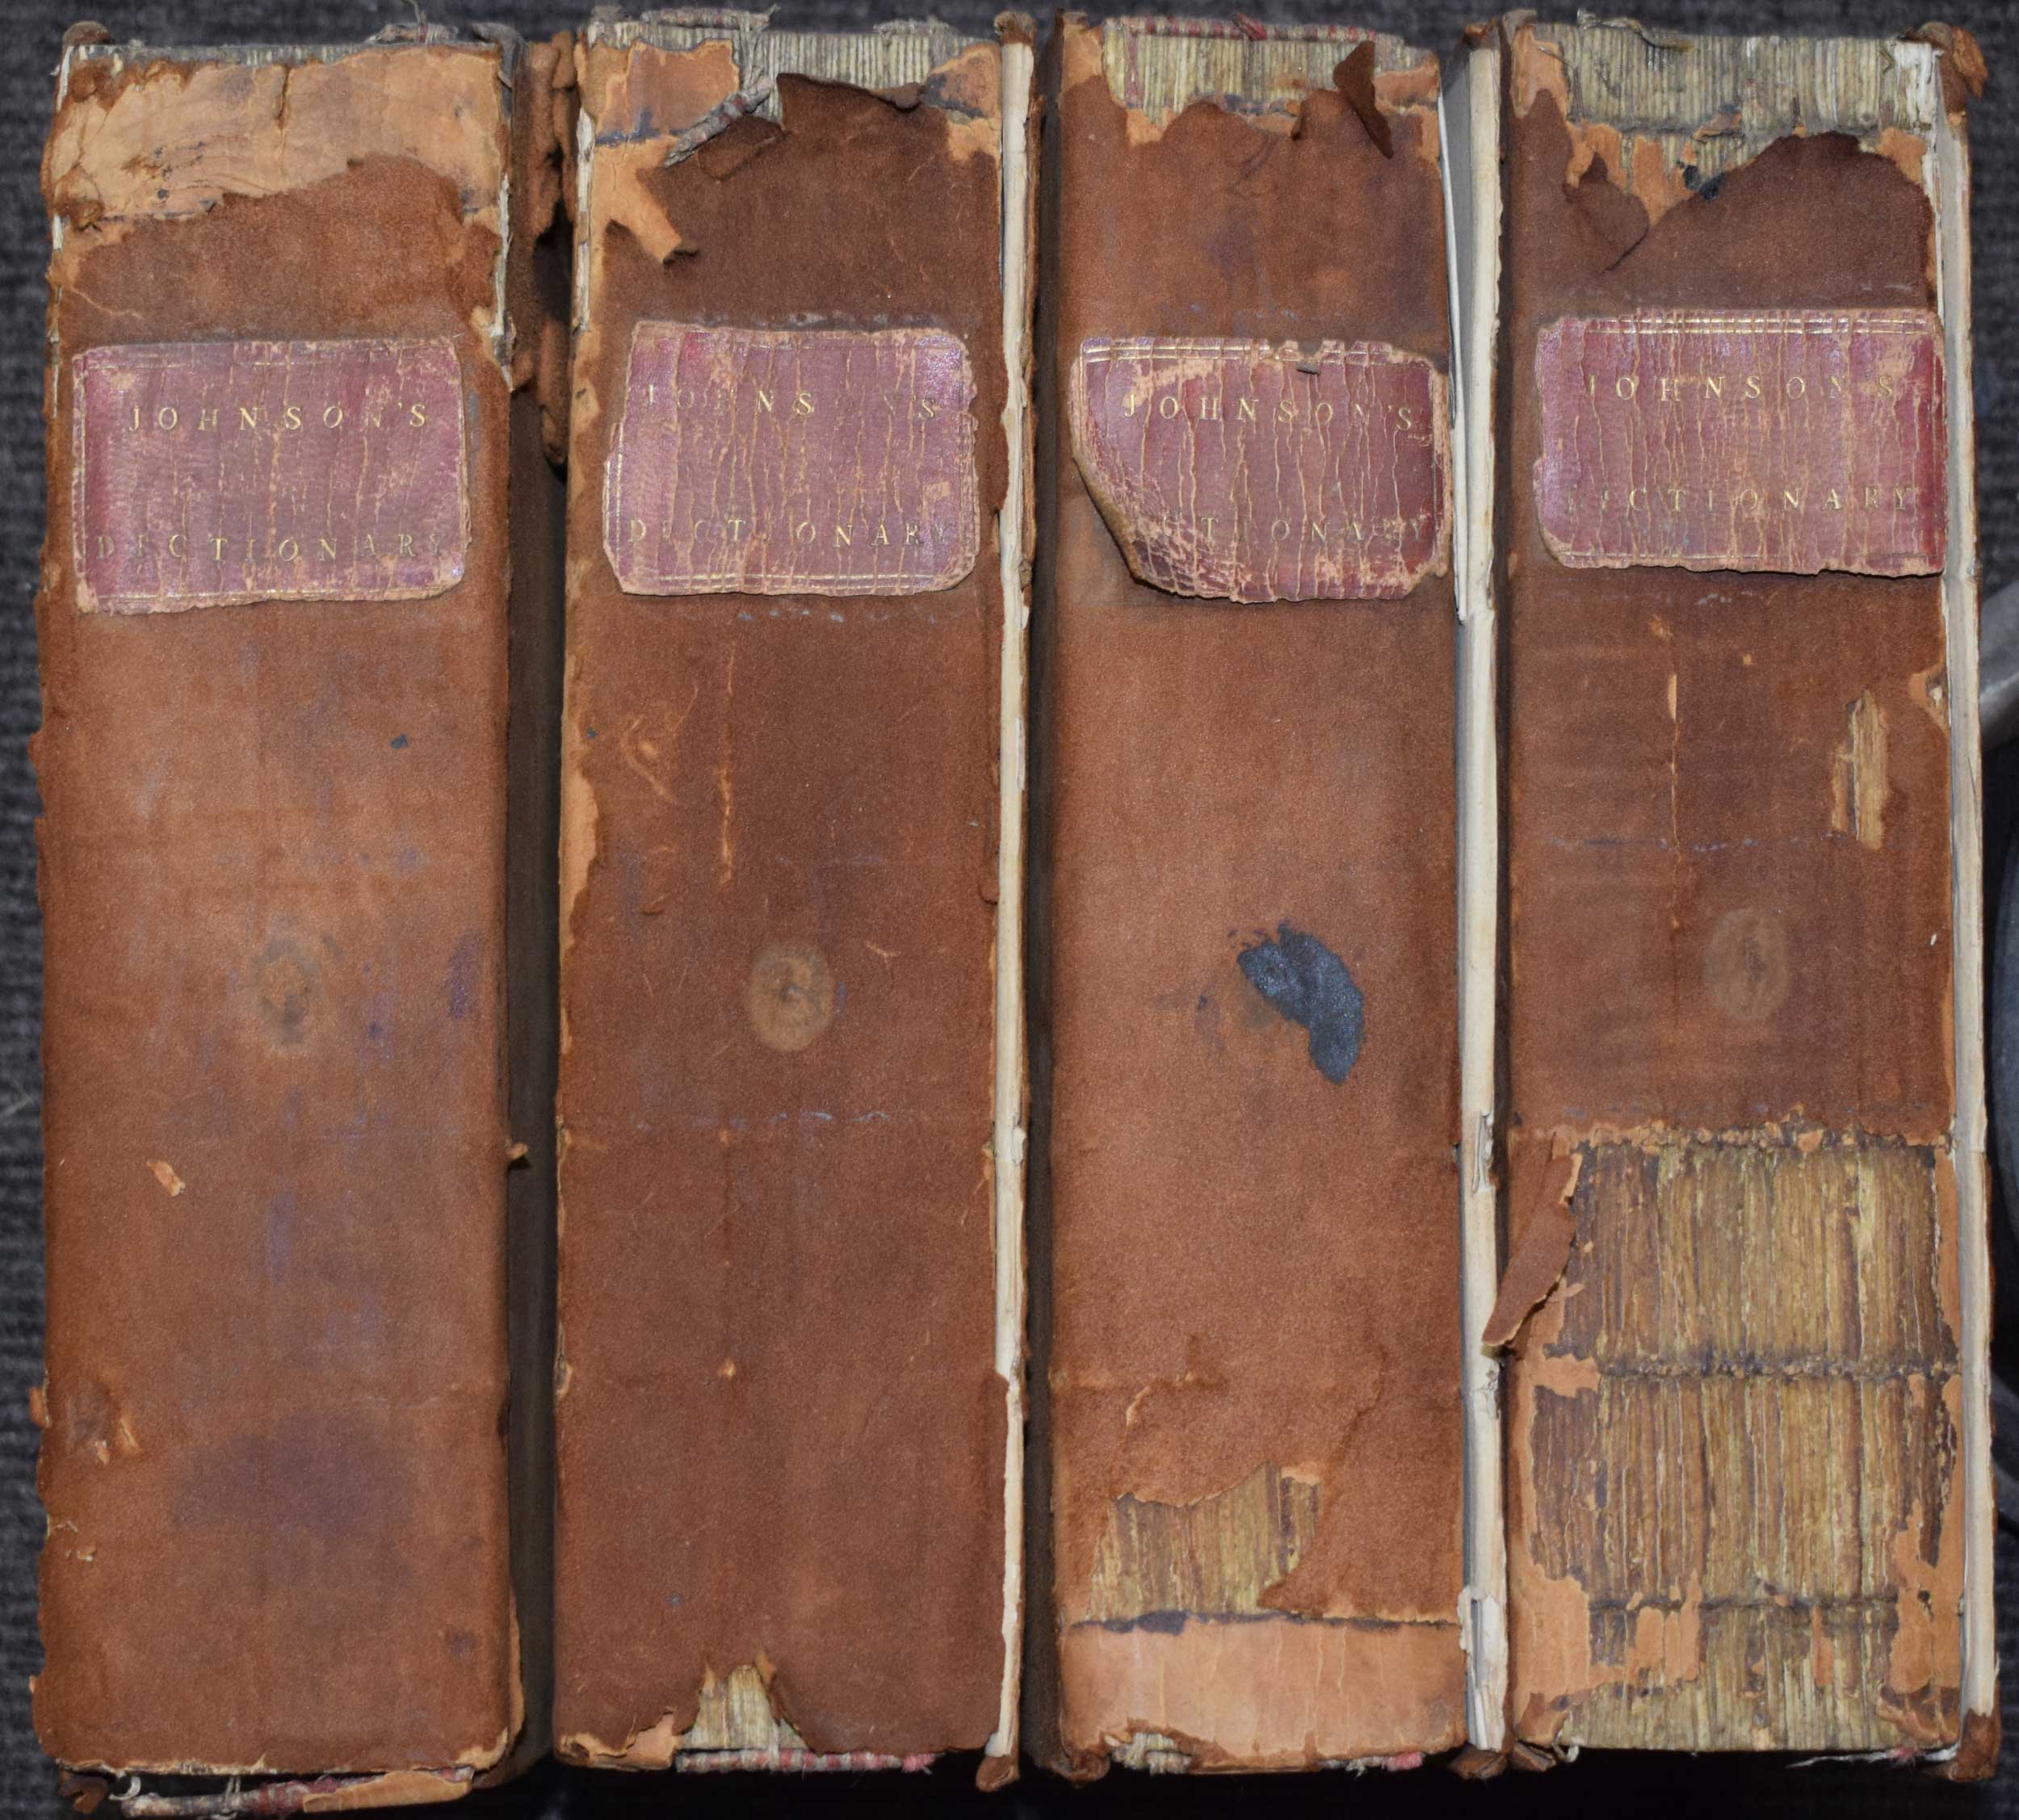 A Dictionary of the English Language. 4 volume set. 1805.